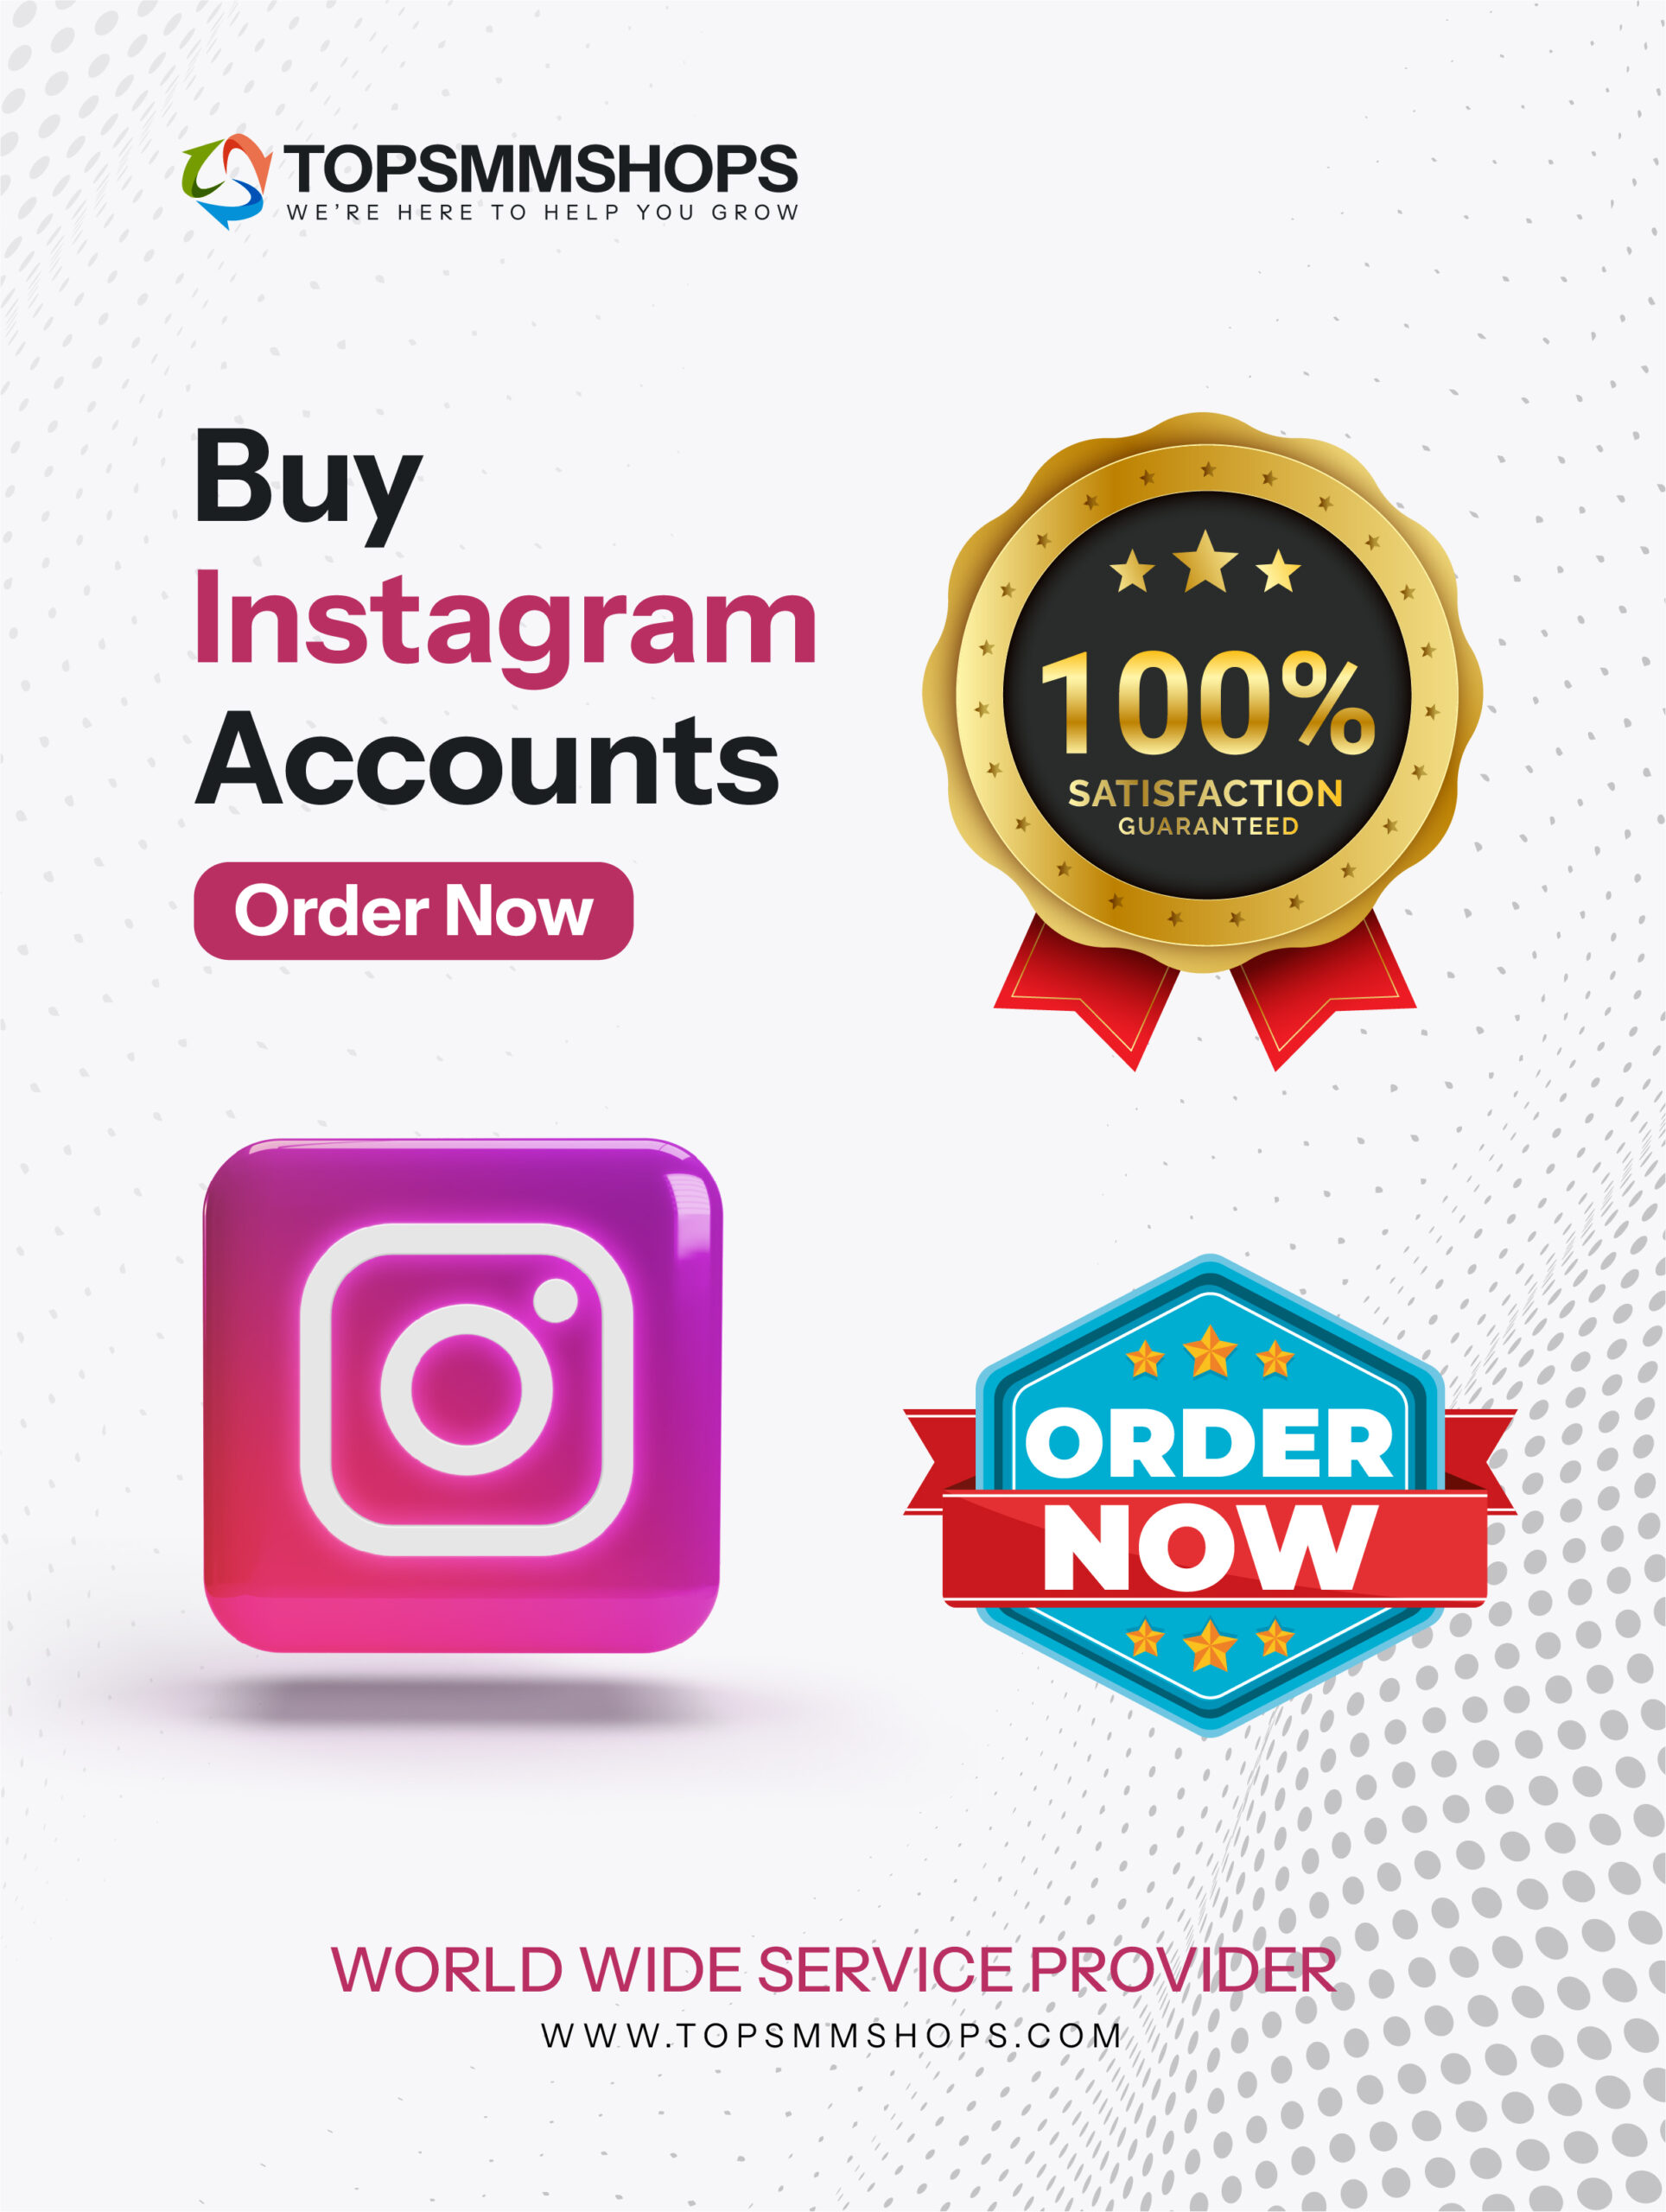 Buy Instagram Accounts - 100% Safely Accounts For Sale...